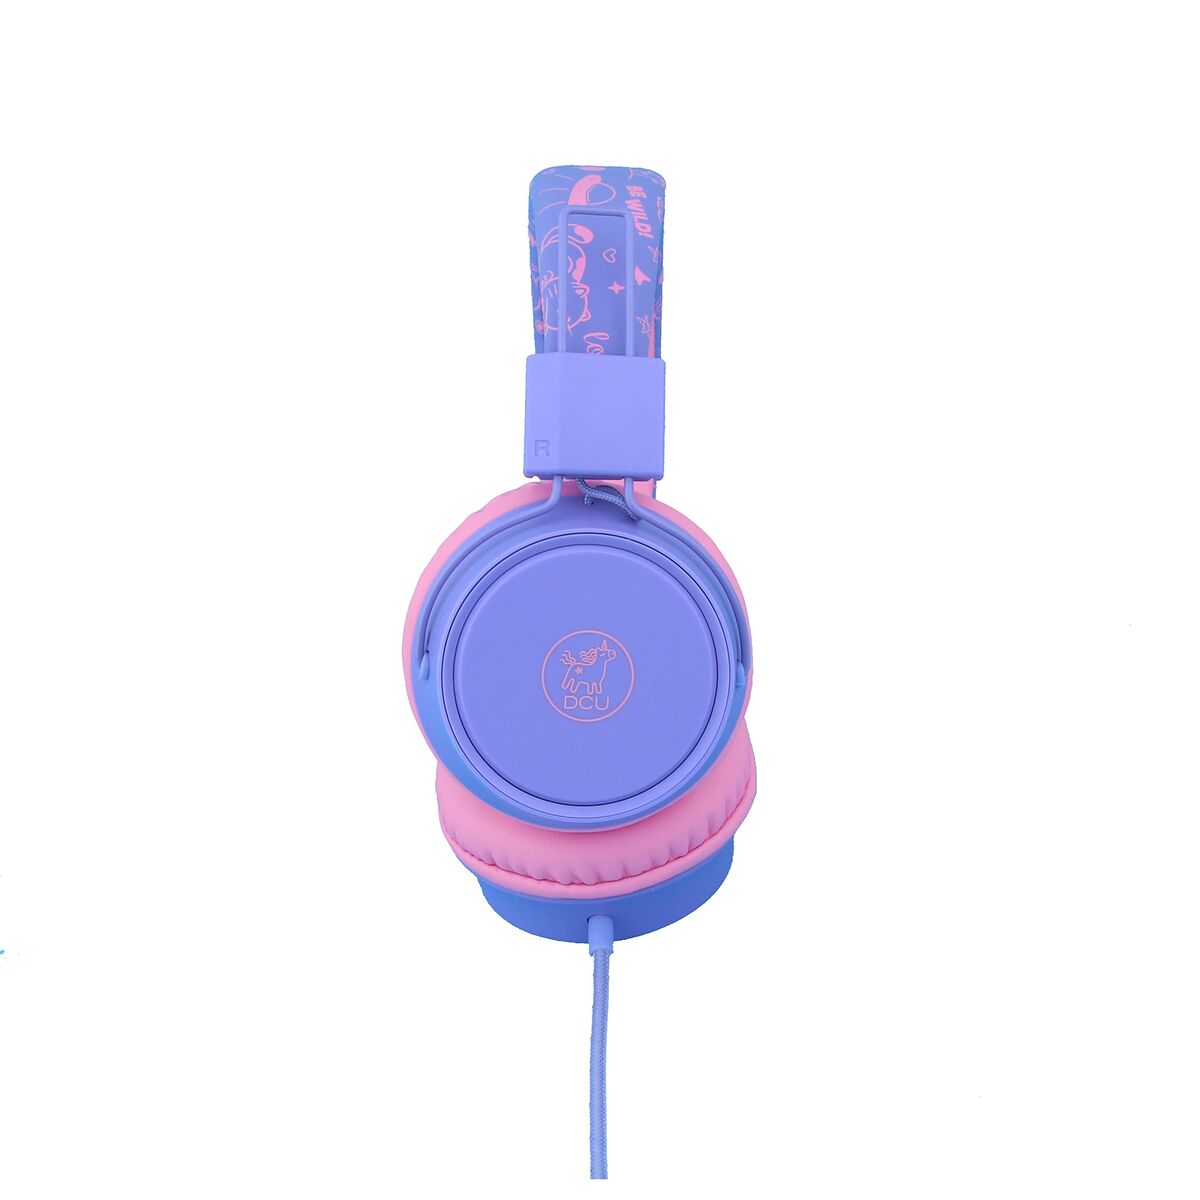 Headphones DCU SAFE Pink, DCU Tecnologic, Electronics, Mobile communication and accessories, headphones-dcu-safe-pink, Brand_DCU Tecnologic, category-reference-2609, category-reference-2642, category-reference-2847, category-reference-t-19653, category-reference-t-21312, category-reference-t-4036, category-reference-t-4037, computers / peripherals, Condition_NEW, entertainment, gadget, music, office, Price_20 - 50, telephones & tablets, Teleworking, RiotNook